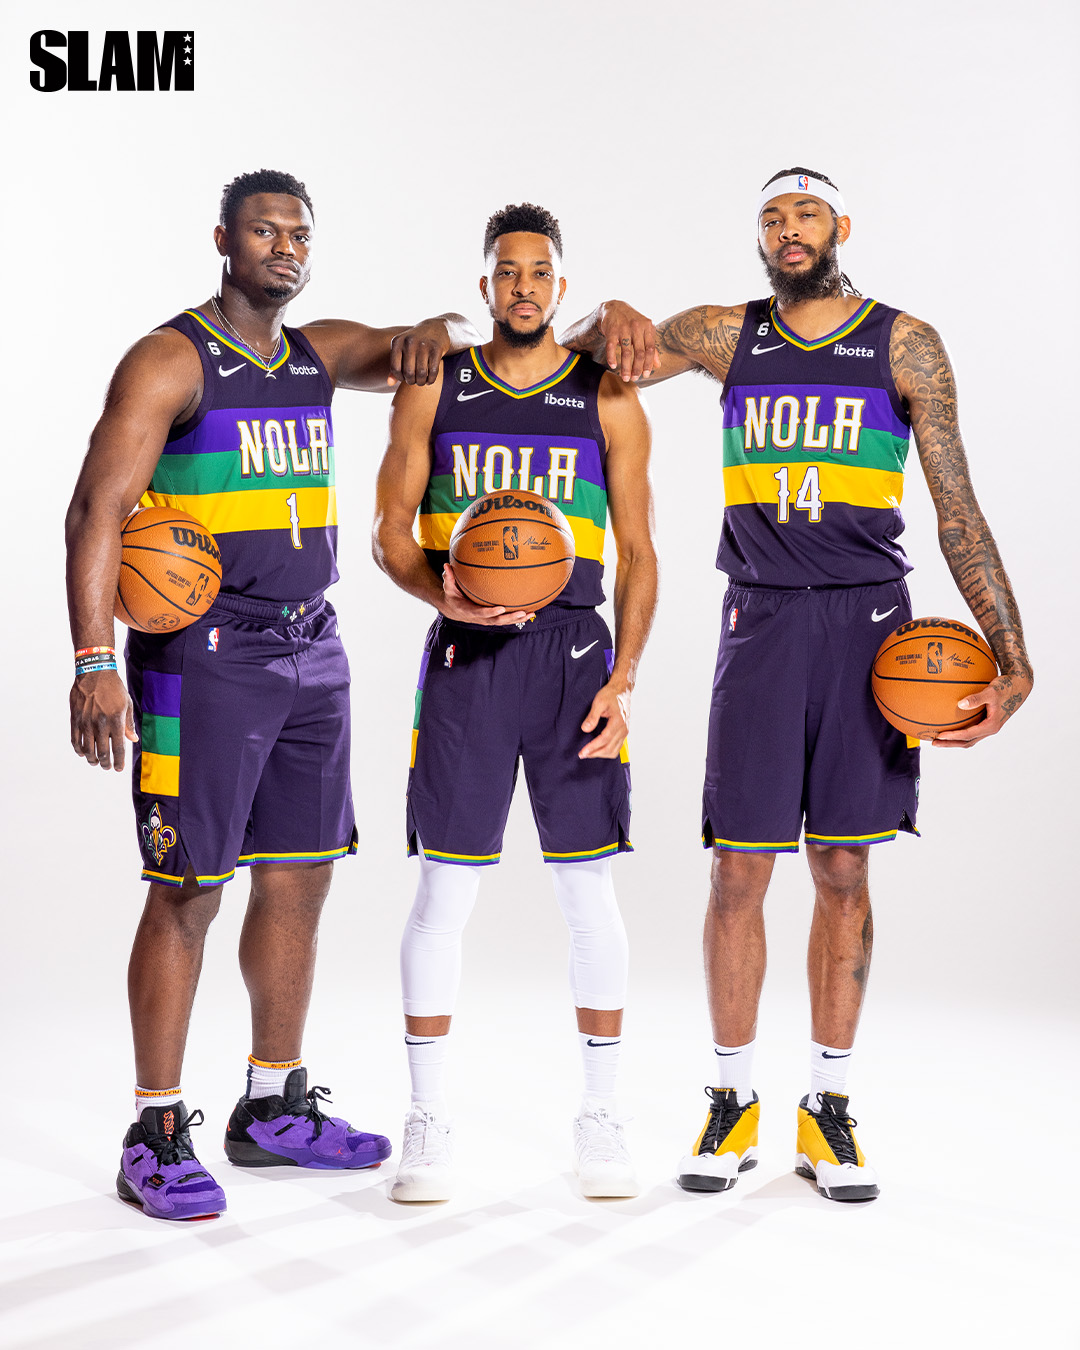 Zion Williamson, CJ McCollum, and Brandon Ingram are Ready to Take the Pelicans to New Heights